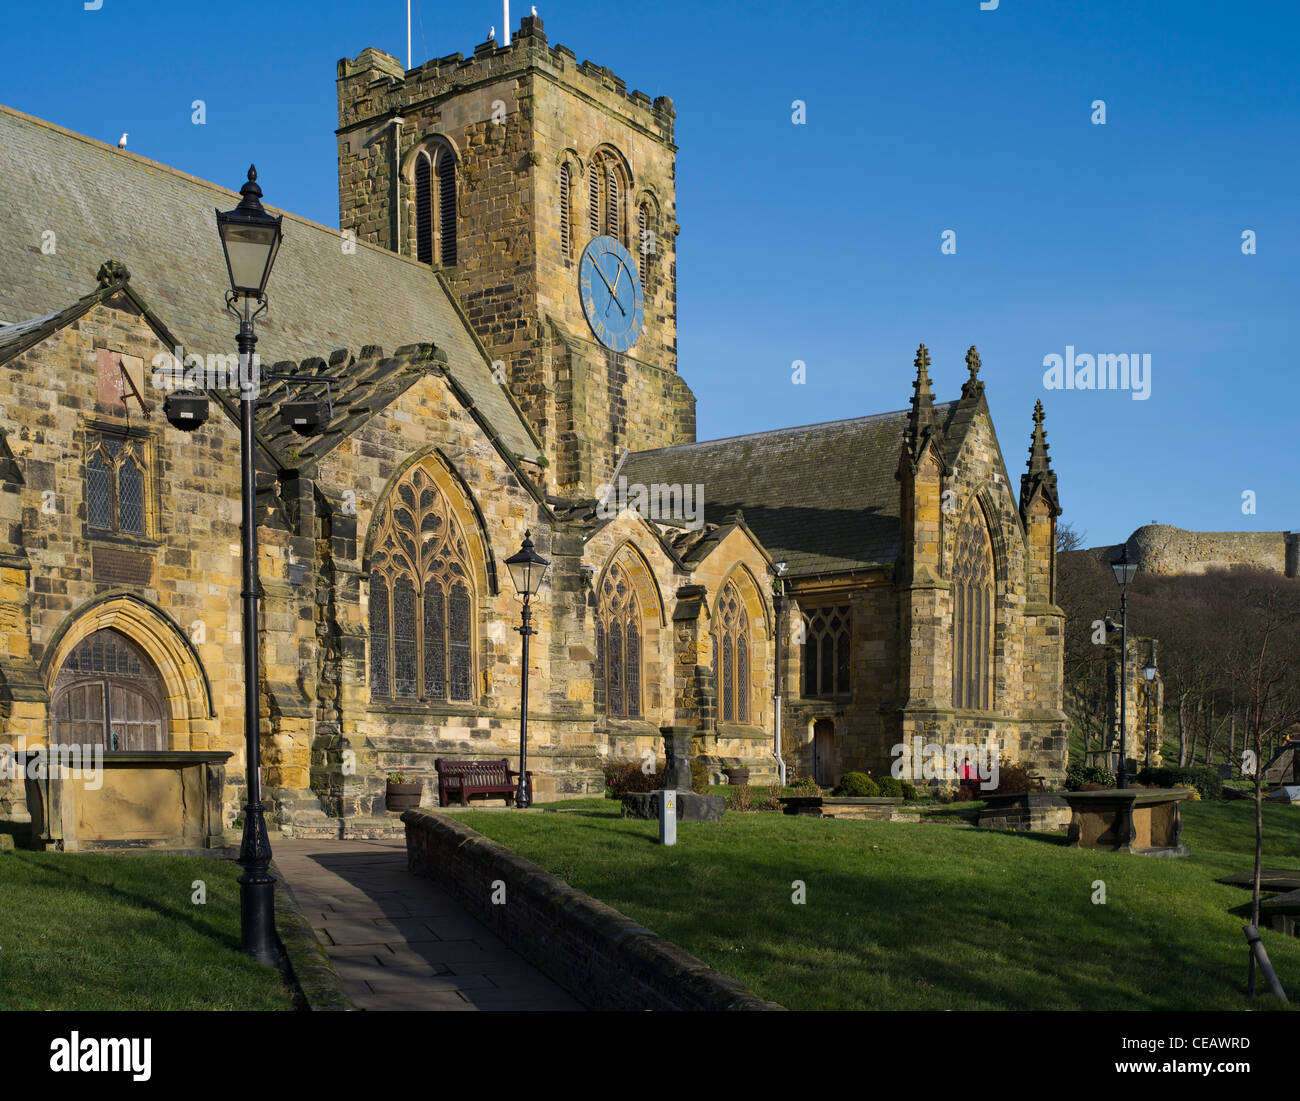 dh Church of St Mary SCARBOROUGH NORTH YORKSHIRE UK Building english Churchyard England Parish Banque D'Images